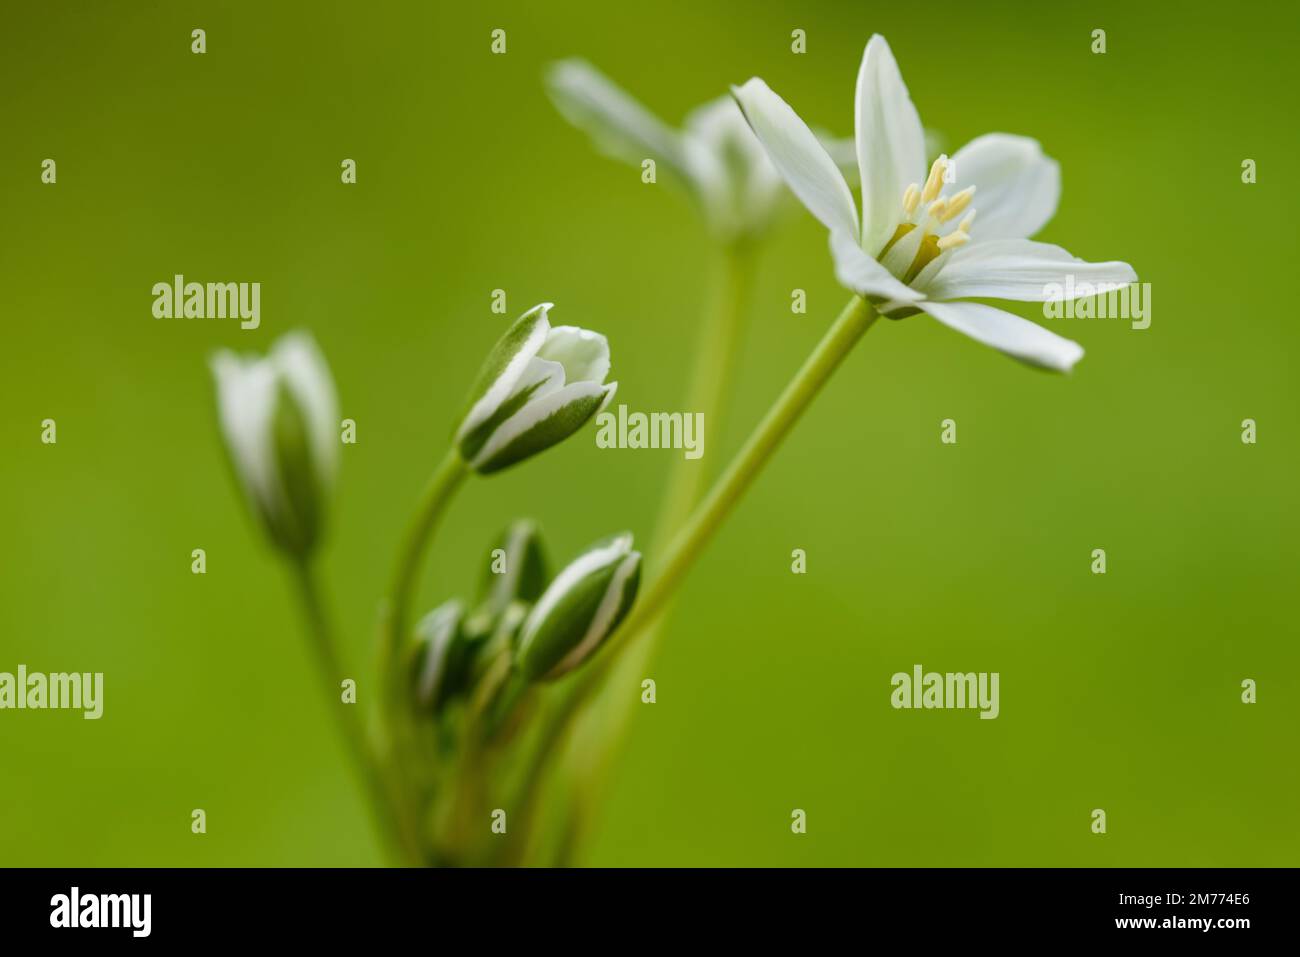 White Grass Lily  Flowers on blurred green Background Stock Photo